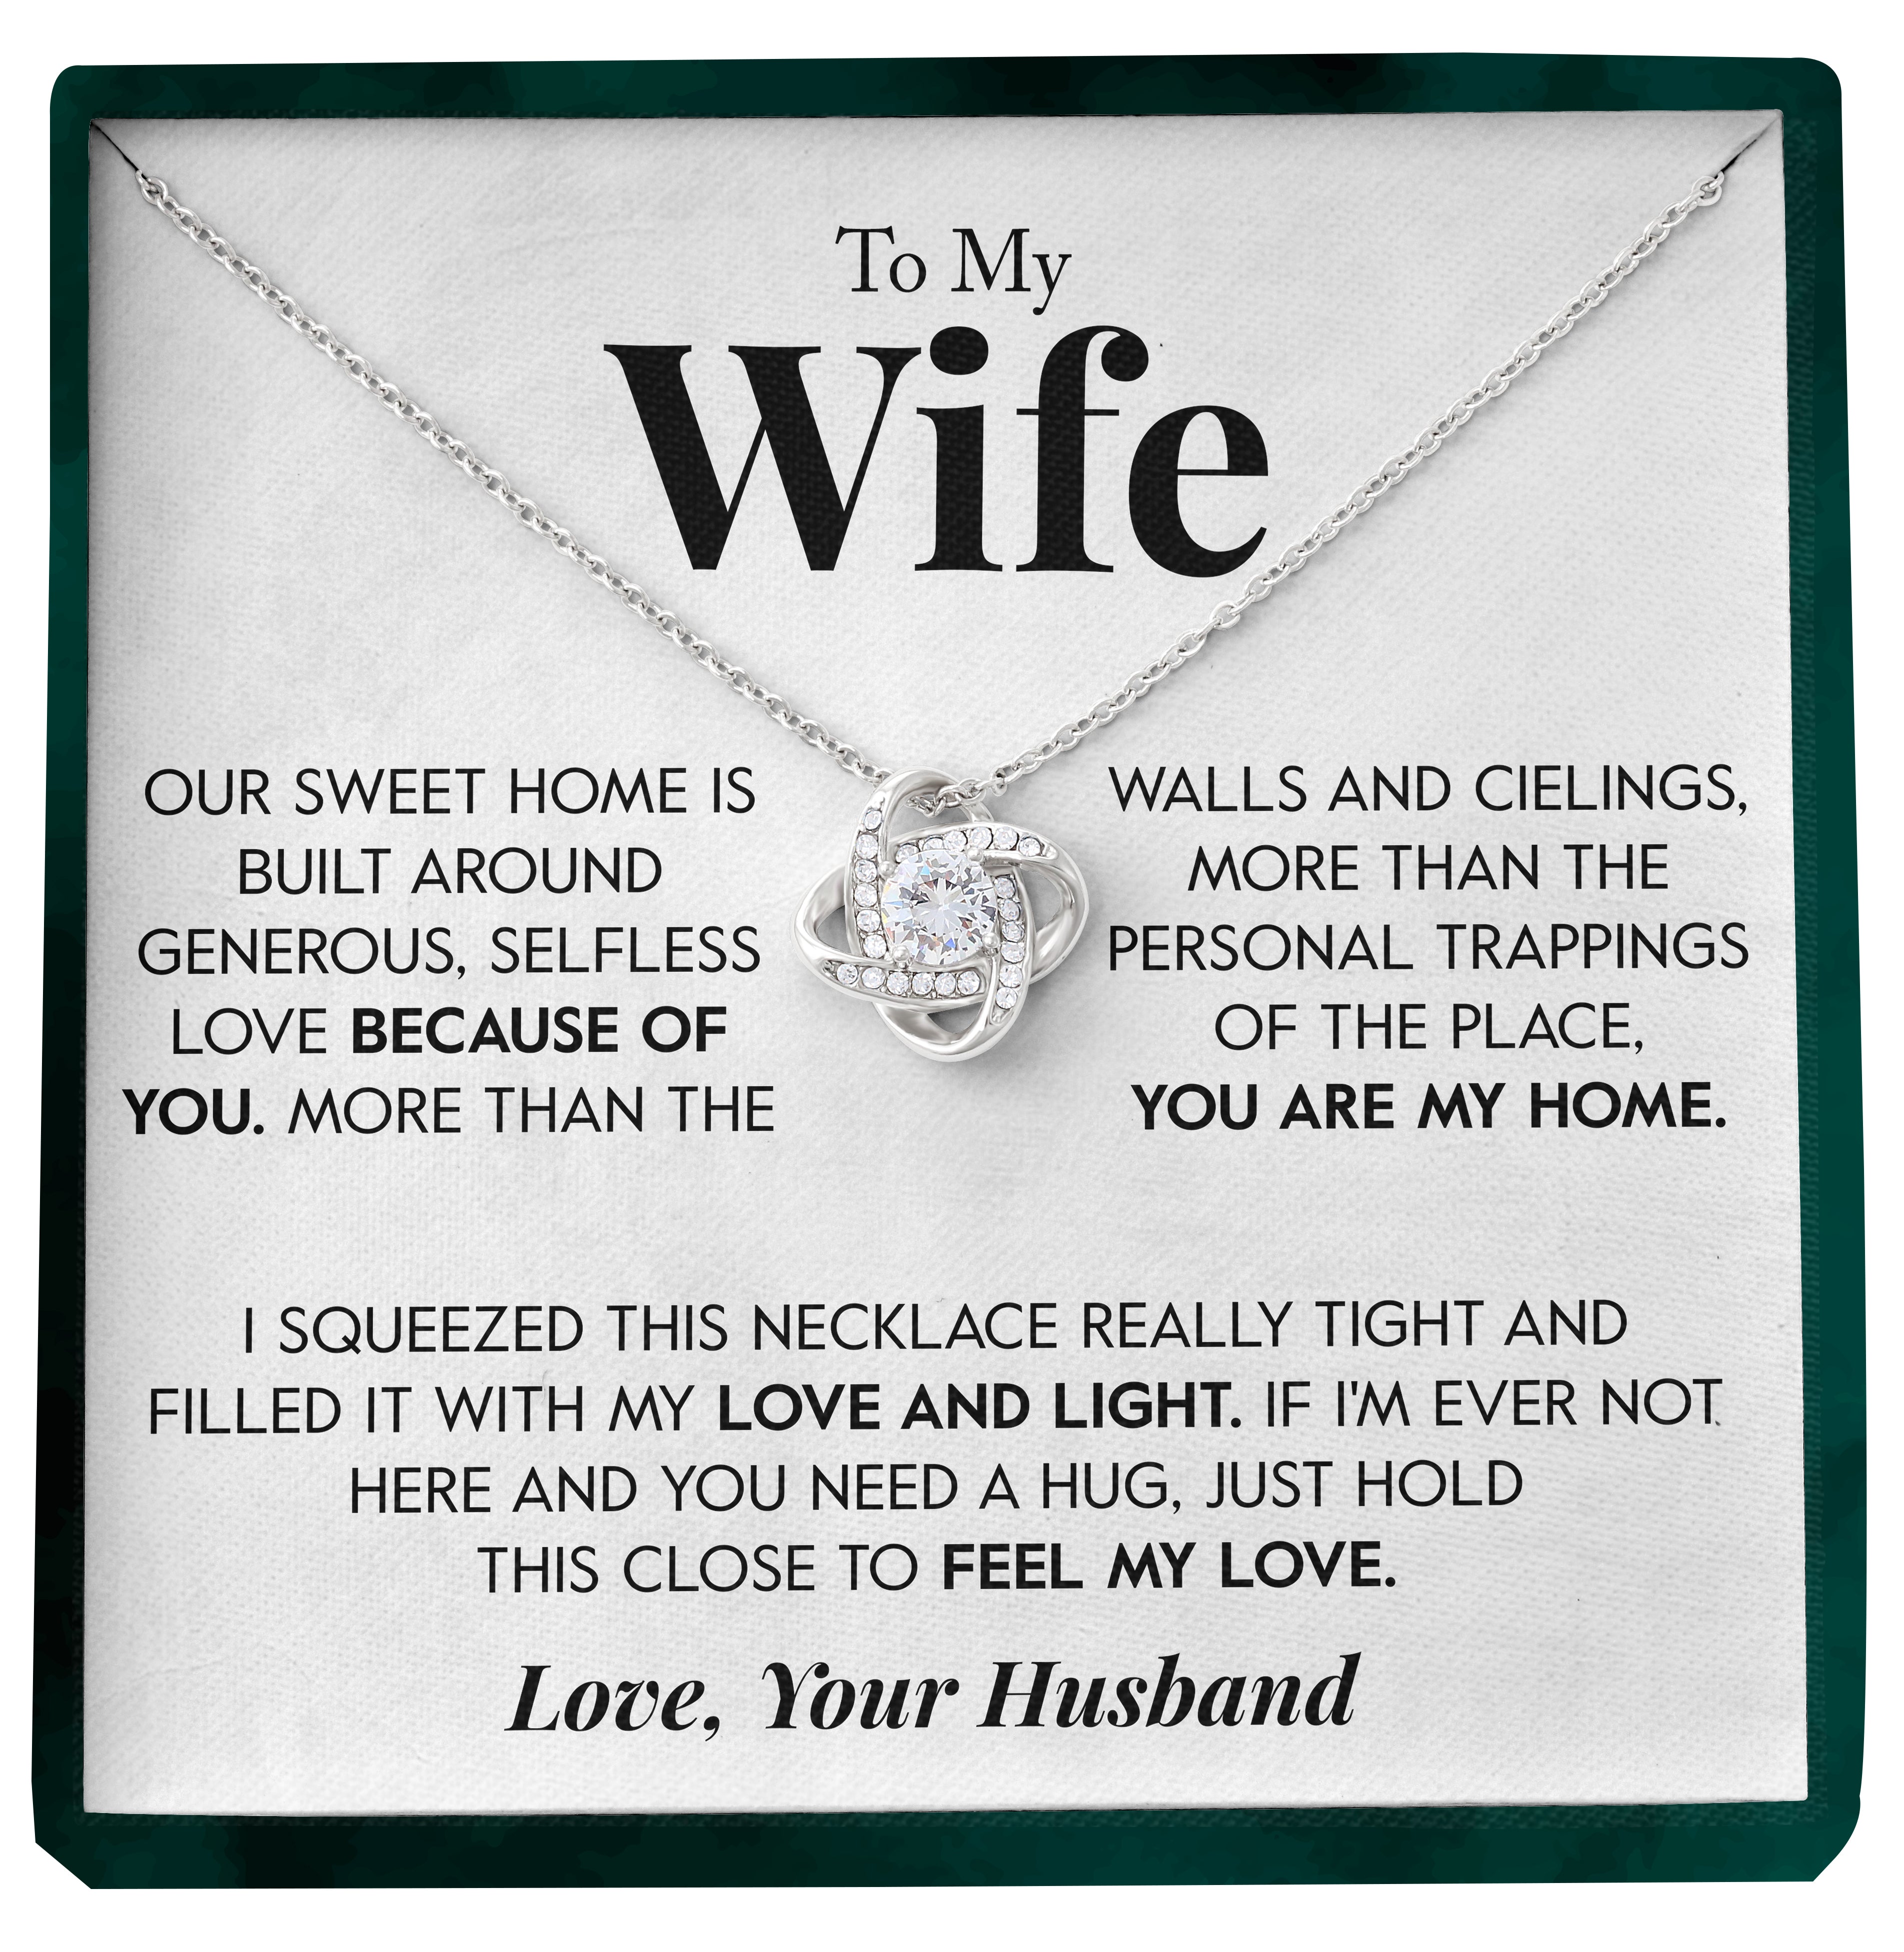 To My Wife | "Because of You" | Love Knot Necklace